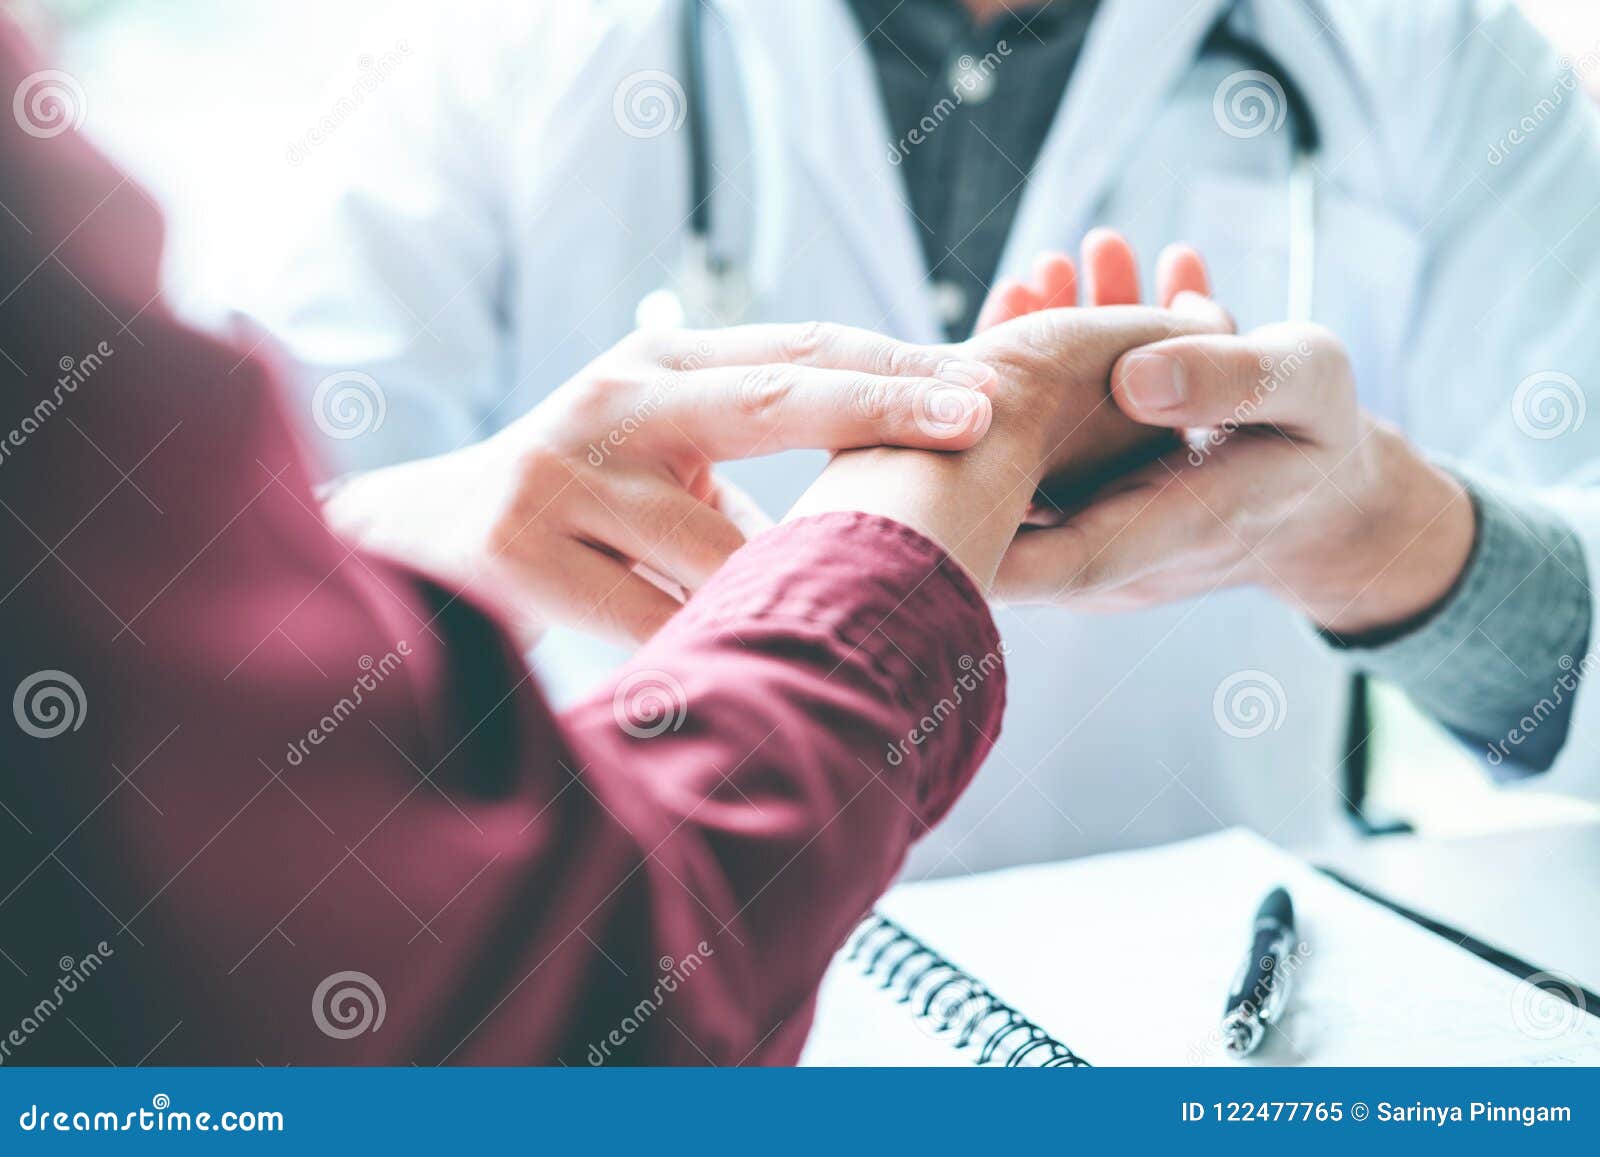 doctor checking pulse for patients health care in hospital